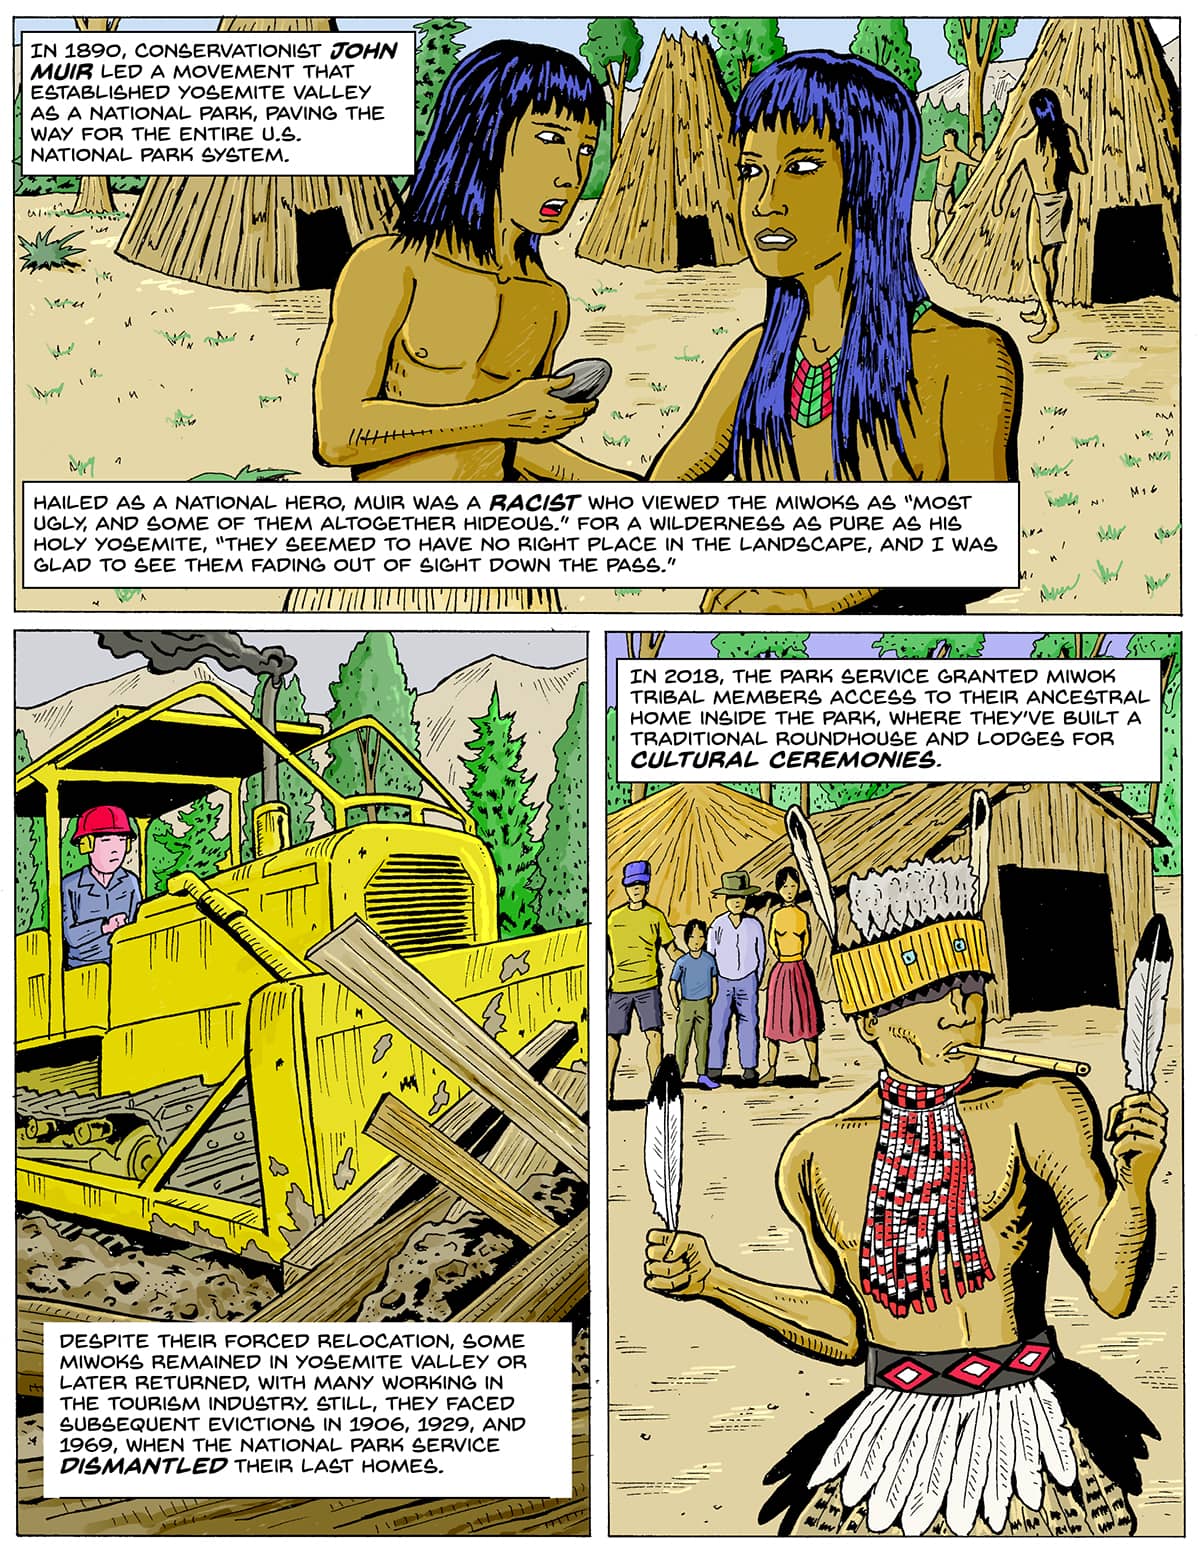 A tri-panel of comics: Top: A Native man and woman talk in front of a line of teepees. Bottom: a yellow bulldozer pushes into a bunch of wood near a line of trees. Bottom right: A man in an elaborate headdress holds feathers in each hand standing in front of a small group of people. Text: In 1890, conservationist John Muir led a movement that established Yosemite Valley as a national park, paving the way for the entire U.S. national park system. Hailed as a national hero, Muir was a racist who viewed the Miwoks as “most ugly, and some of them altogether hideous.” For a wilderness as pure as his holy Yosemite, “they seemed to have no right place in the landscape, and I was glad to see them fading out of sight down the pass.” Despite their forced relocation, some Miwoks remained in Yosemite Valley or later returned, with many working in the tourism industry. Still, they faced subsequent evictions in 1906, 1929, and 1969, when the National Park Service dismantled their last homes. In 2018, the park service granted Miwok tribal members access to their ancestral home inside the park, where they’ve built a traditional roundhouse and lodges for cultural ceremonies.